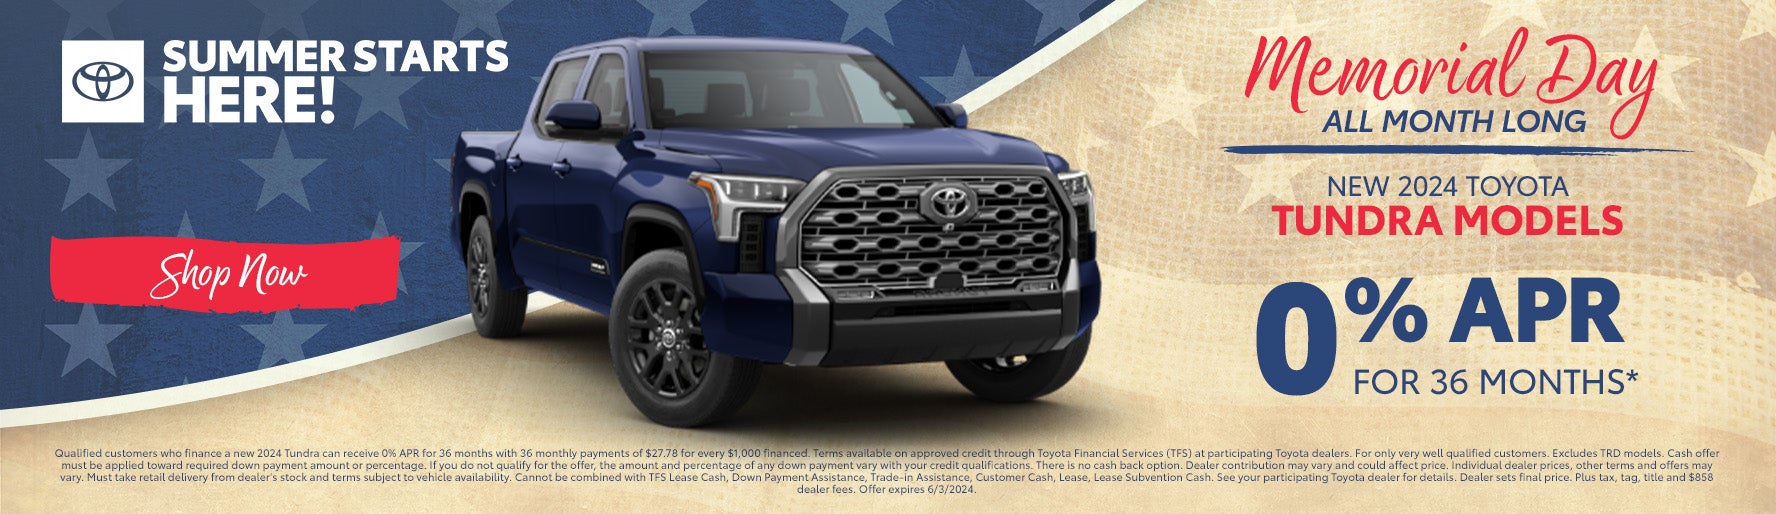 New 2024 Toyota Tundra Models 0% APR for 36 Months